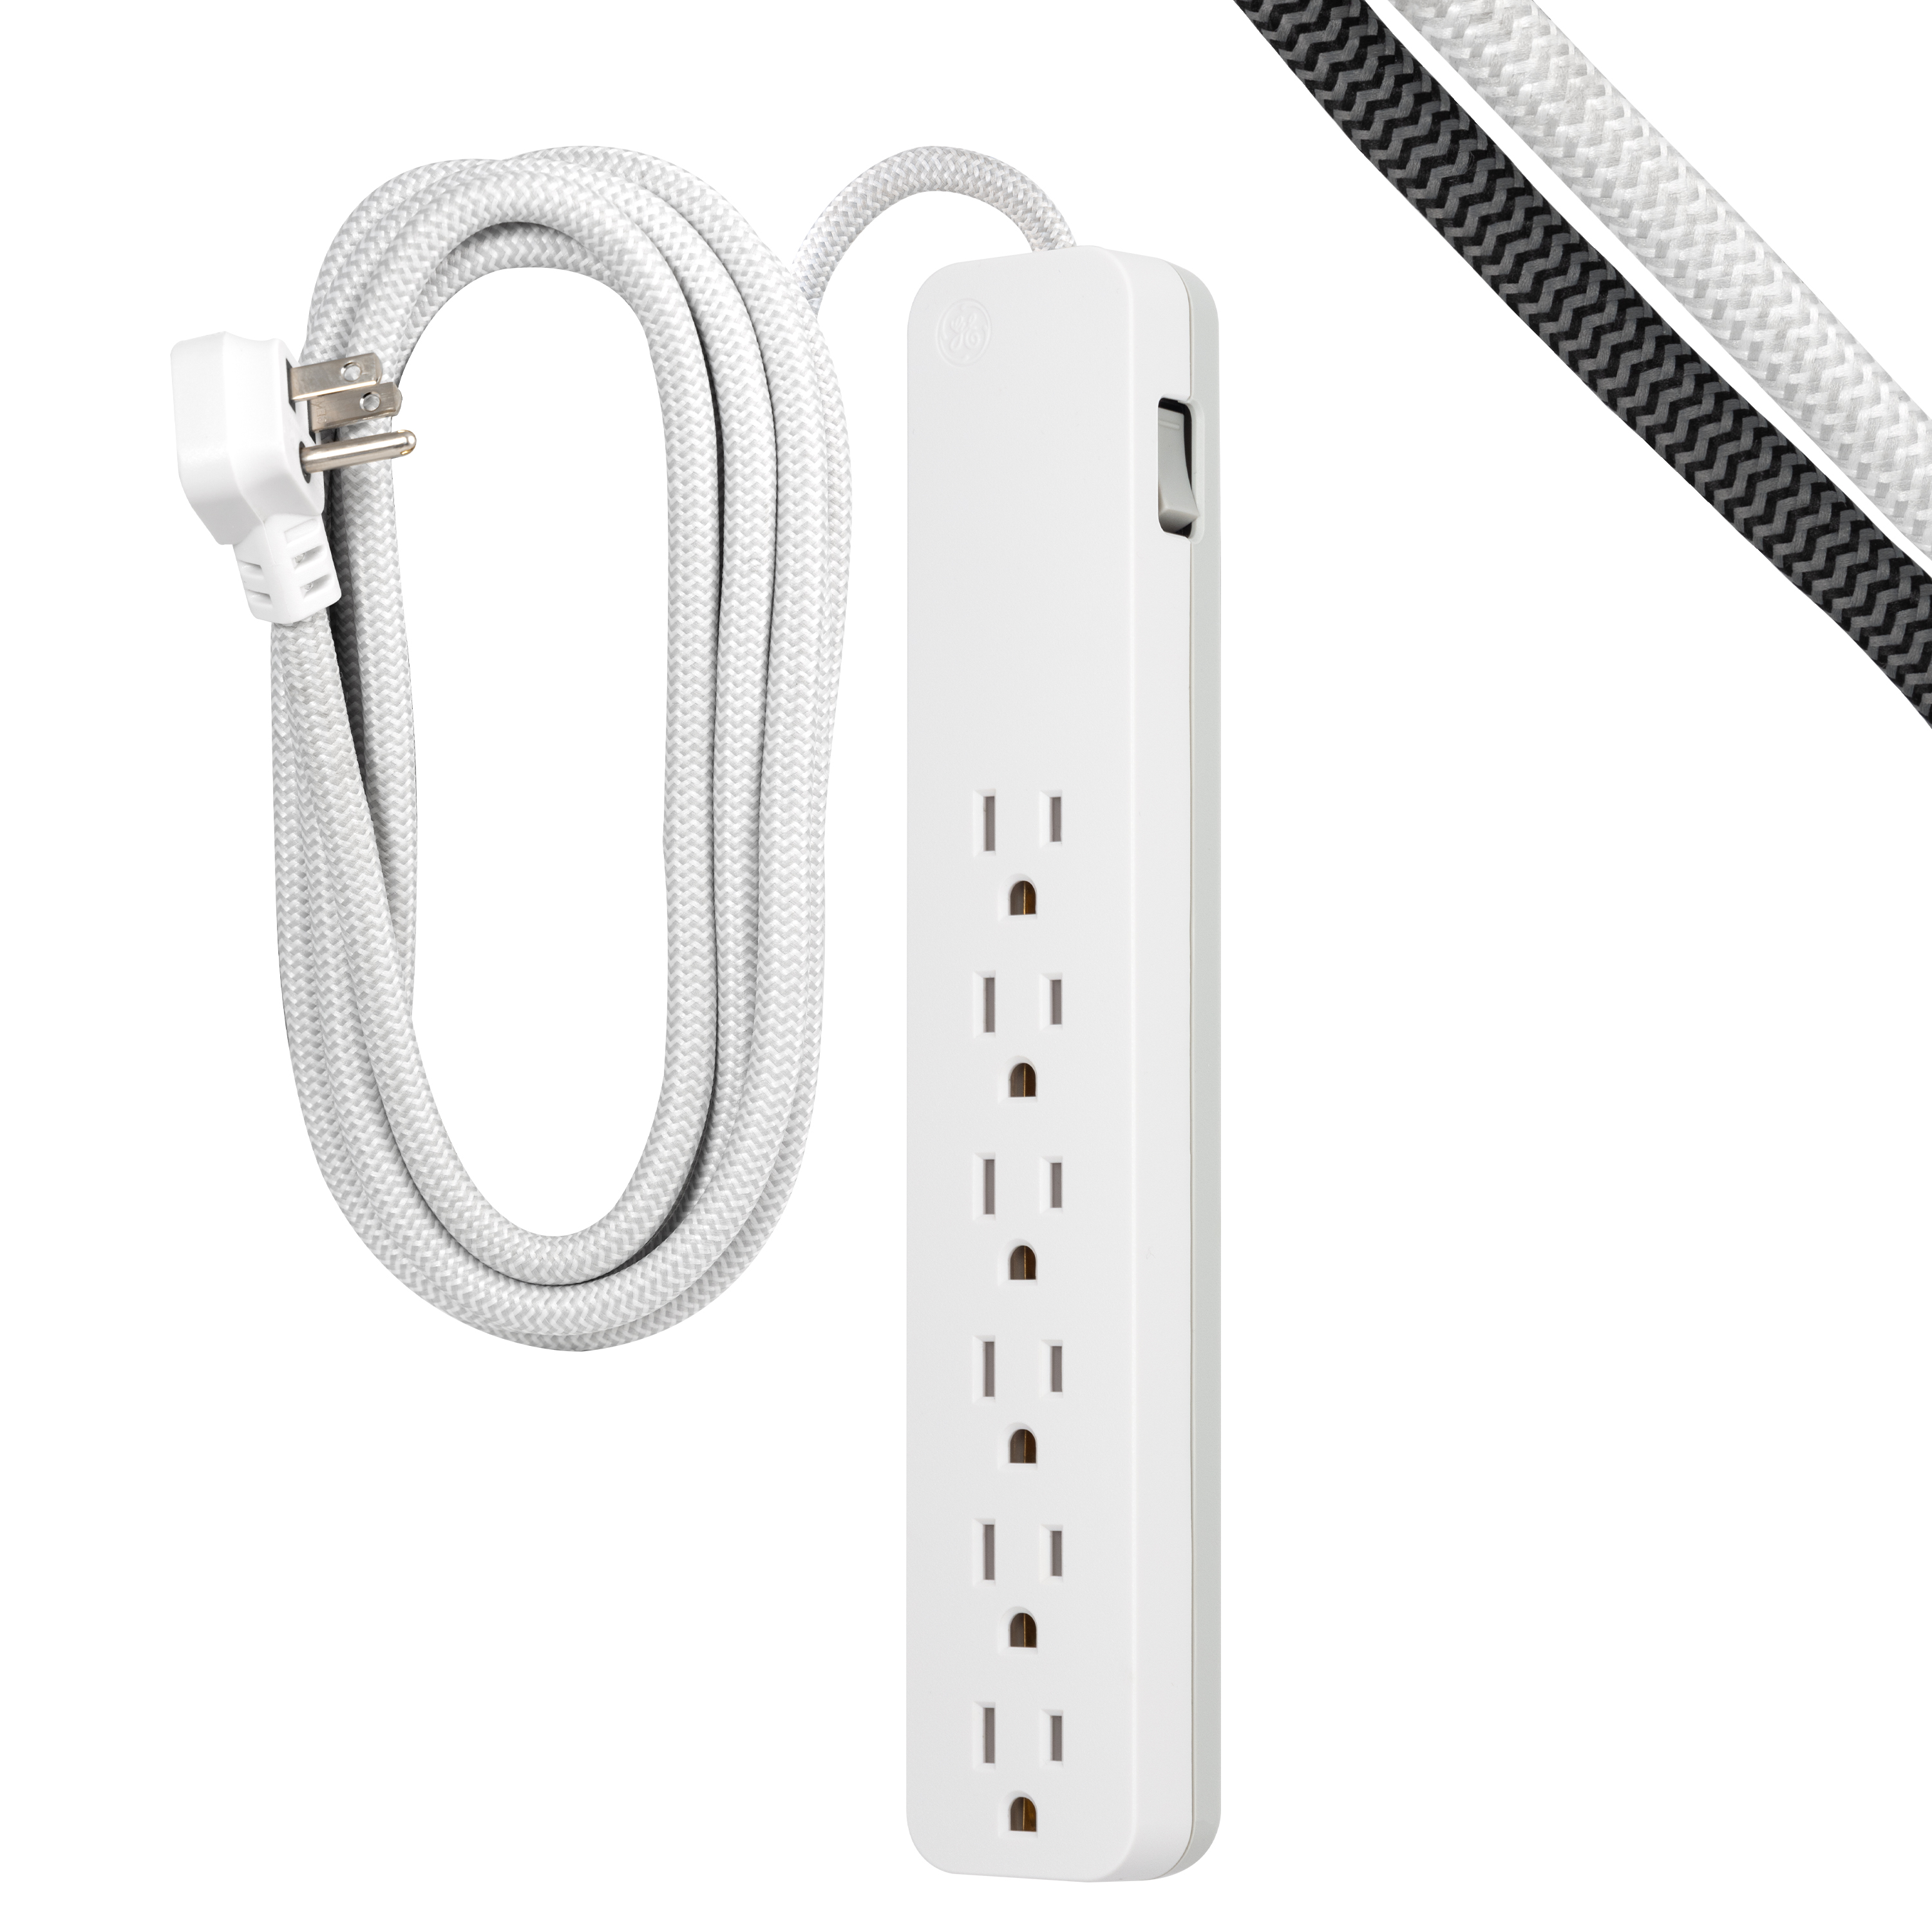 GE 6-Outlet Surge Protector, 840J, 10ft. Braided Cord, White, 62933 - image 1 of 7